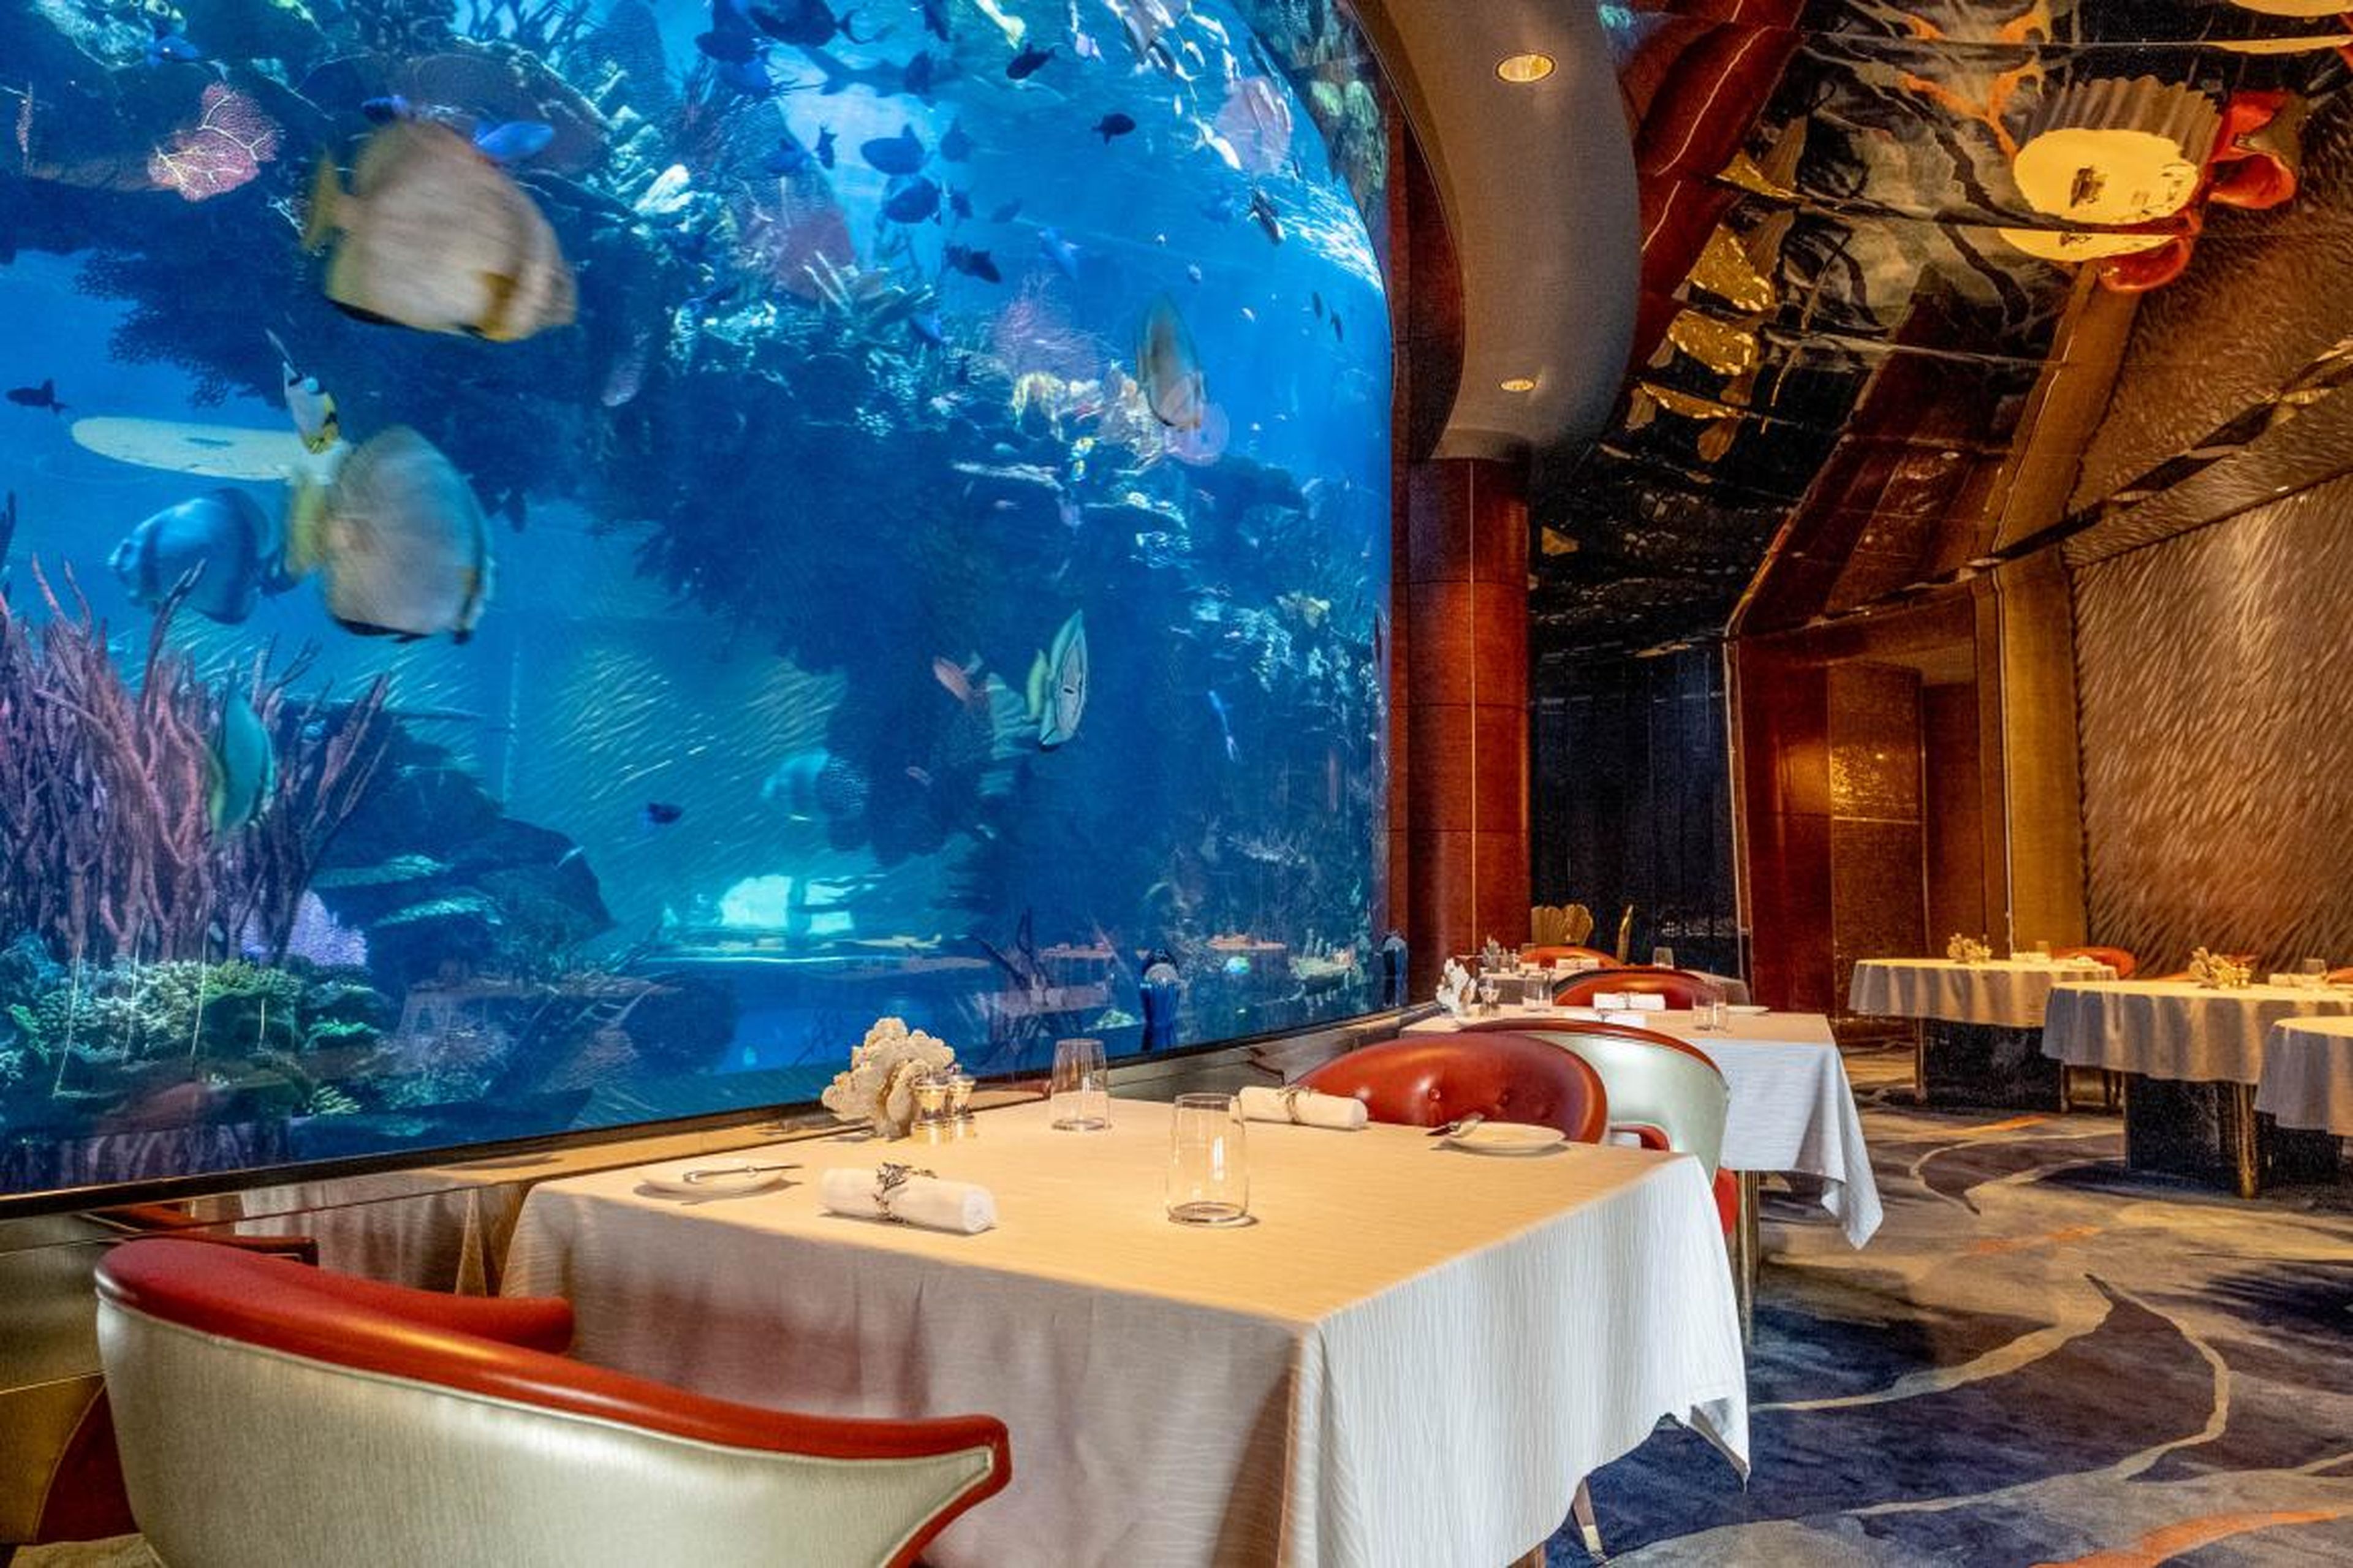 The dining room of Al Mahara wraps around a floor-to-ceiling 260,000-gallon aquarium filled with fish (not the ones you'll be eating). The staff have taken to naming the fish, like a goofy-looking Napoleon fish known as George.